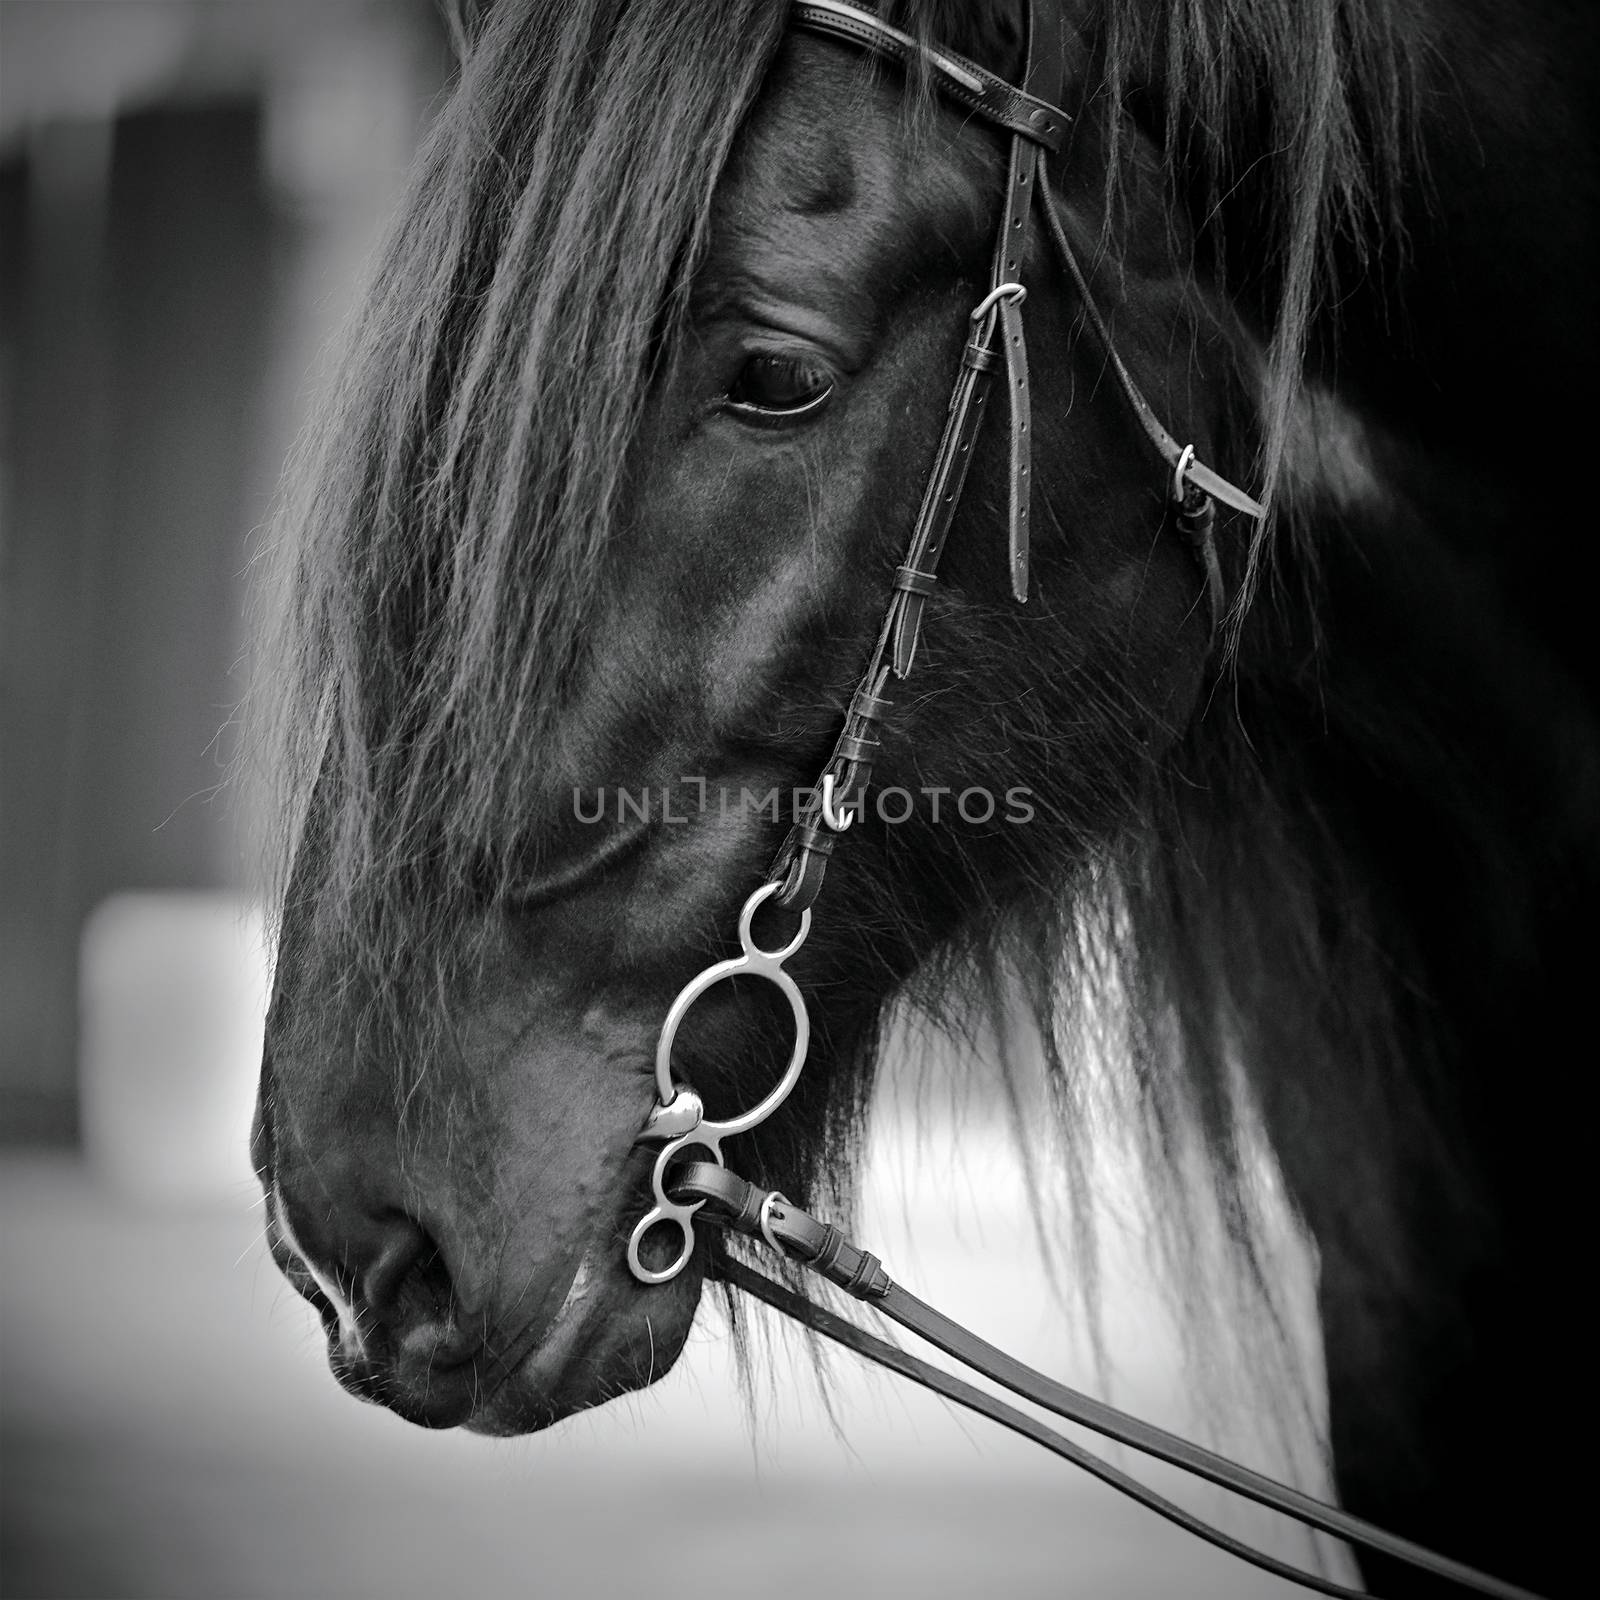 Muzzle of a horse. Stallion. Portrait of a horse. Thoroughbred horse. Beautiful horse.